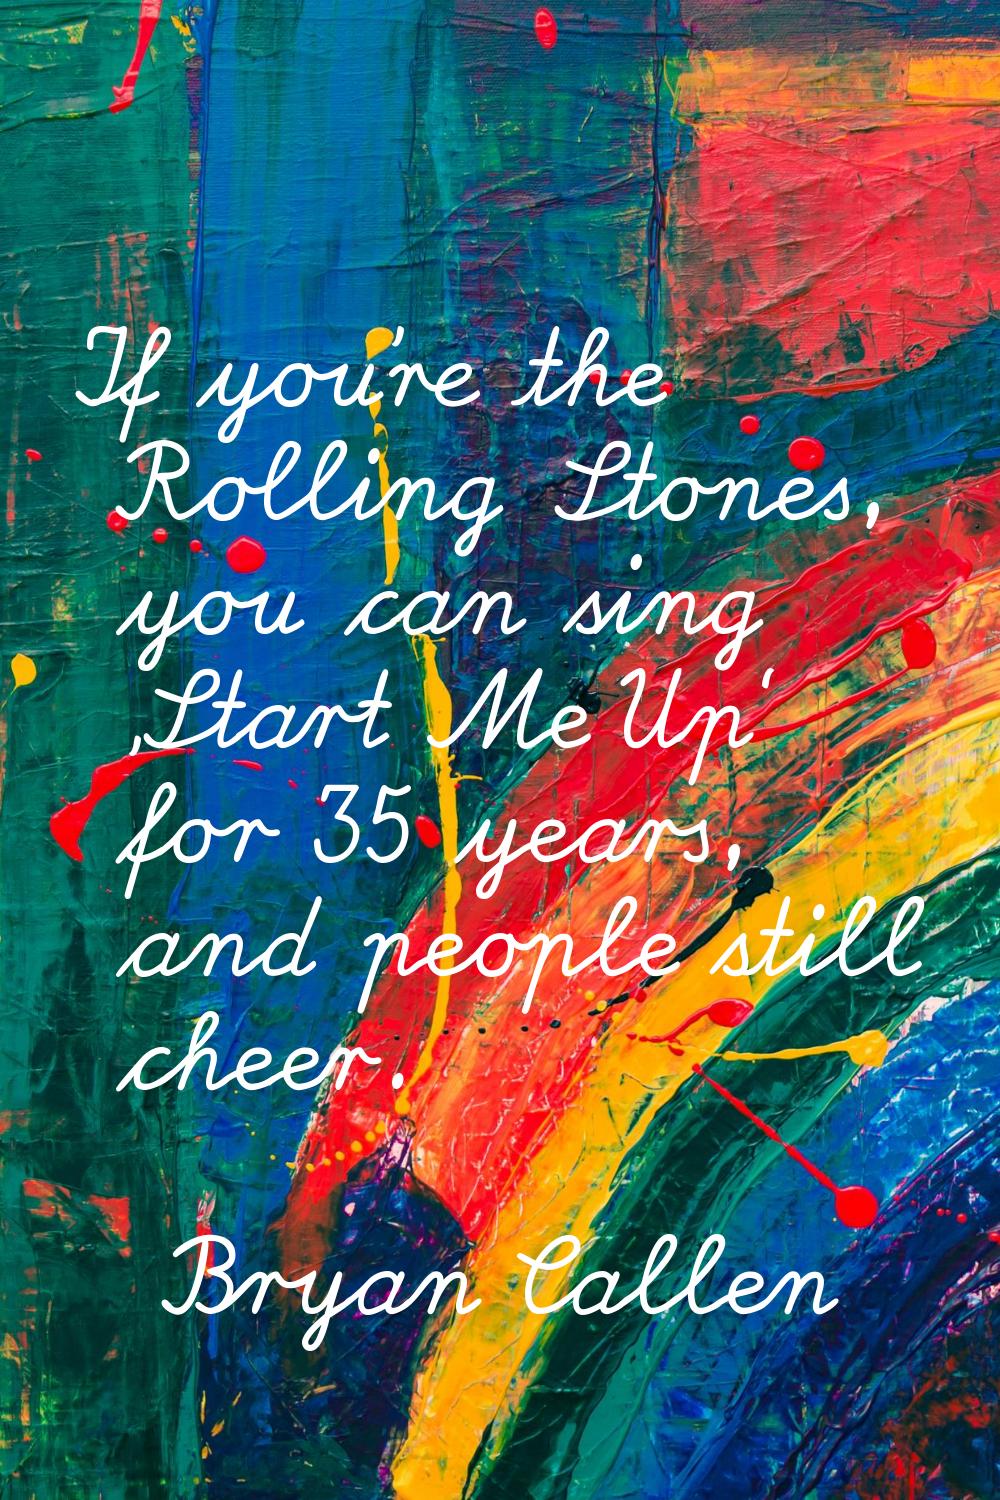 If you're the Rolling Stones, you can sing 'Start Me Up' for 35 years, and people still cheer.